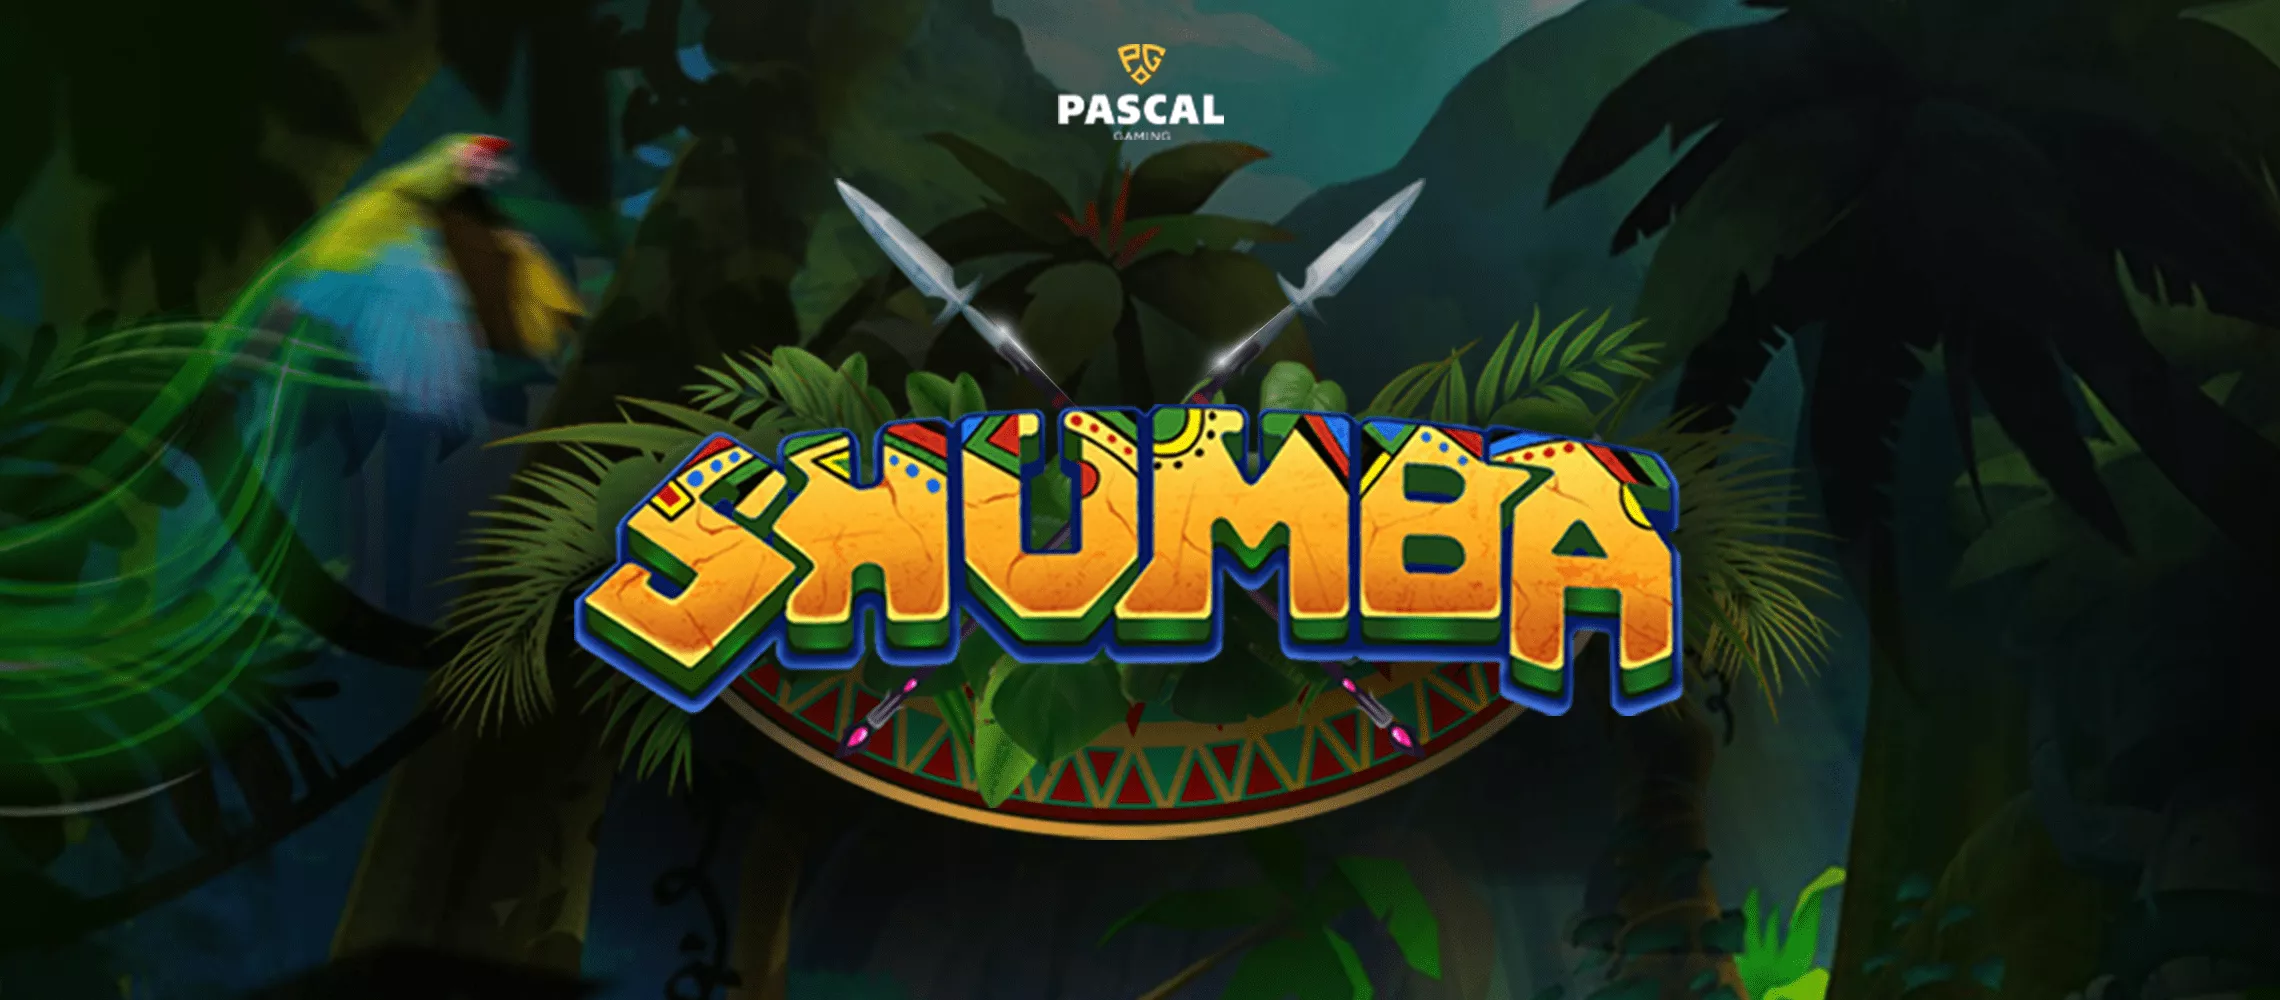 What’s New in Pascal Gaming: Greet Shumba!